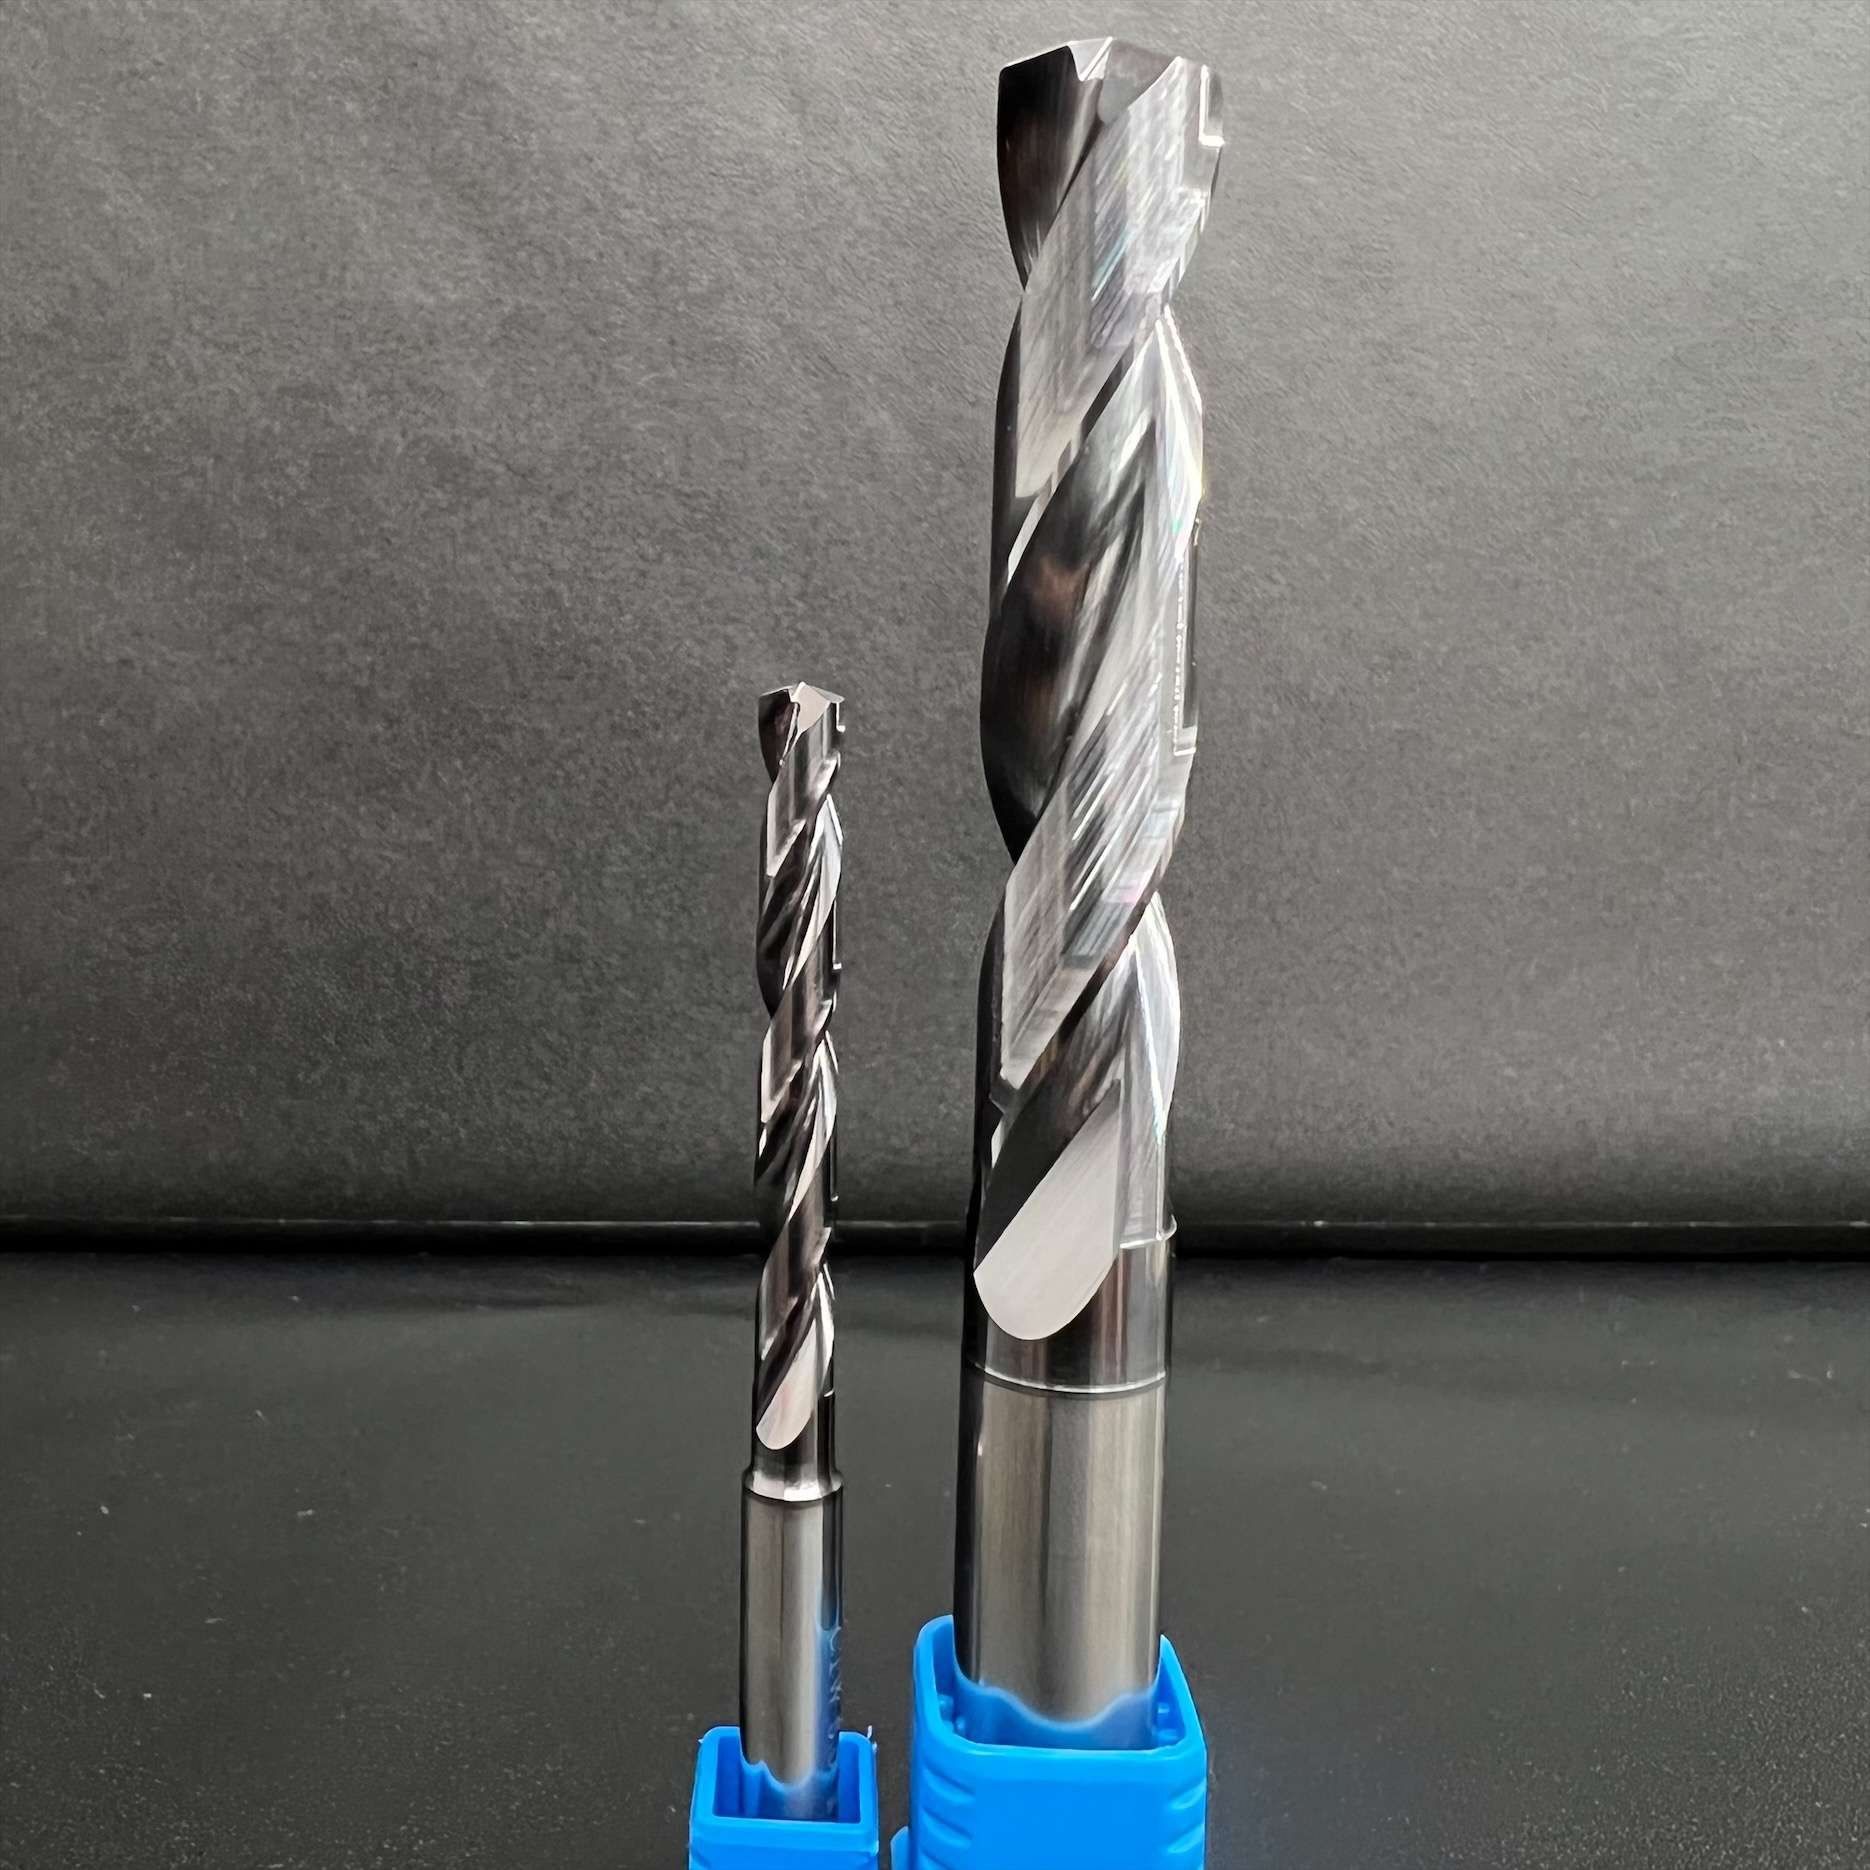 CTW5D 超硬5Dタイプオイル穴無し2枚刃ドリル【刀】 2 Flutes Tungsten Carbide Drill 5D Type without Oil Hole